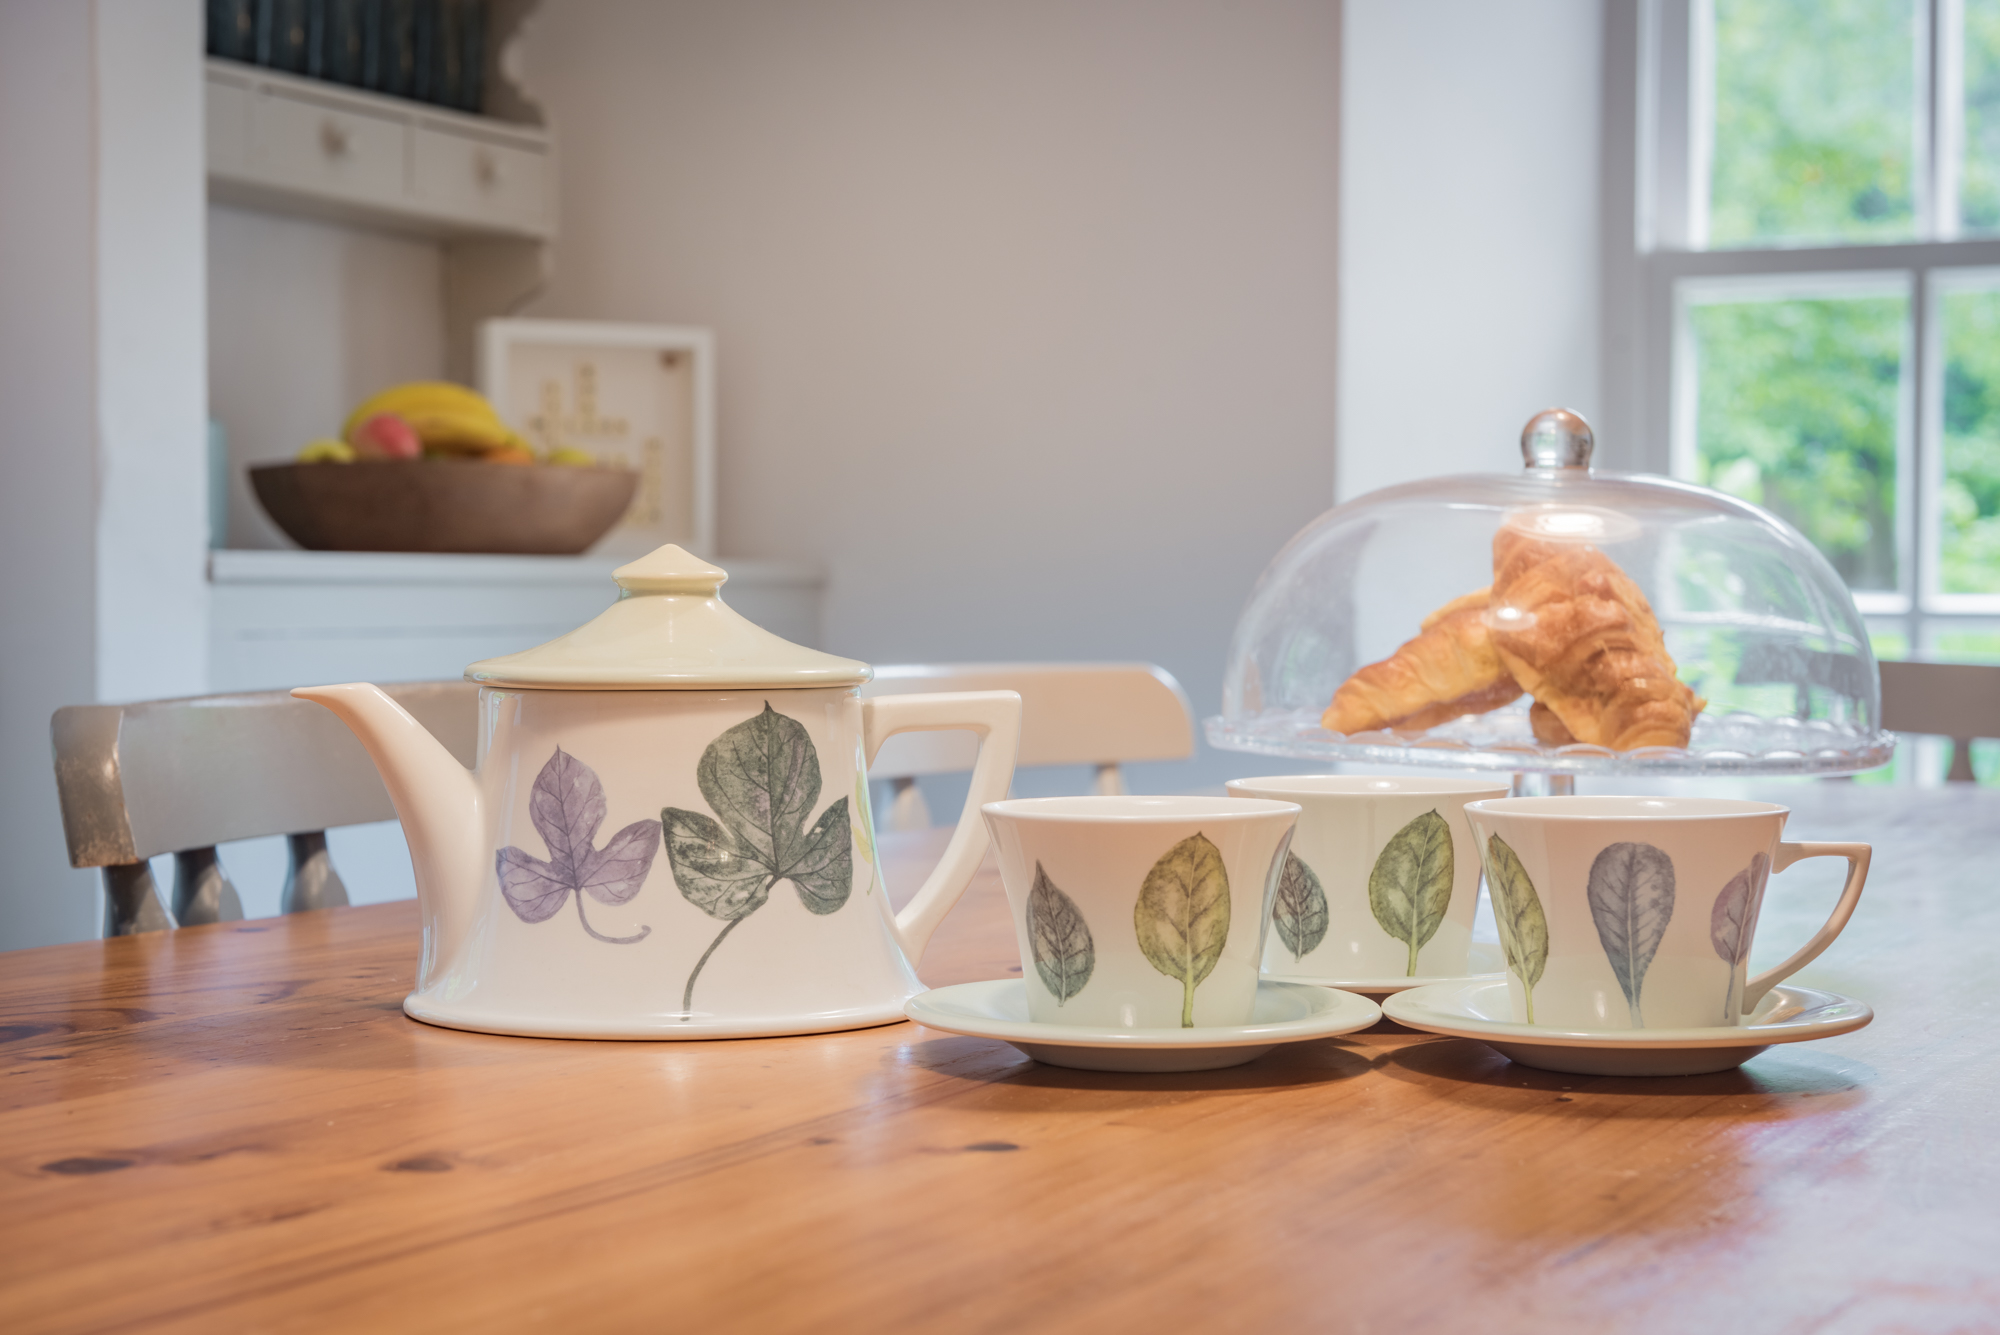 Kitchen lifestyle photography by Alexander Gibson Estate Agents Harrogate